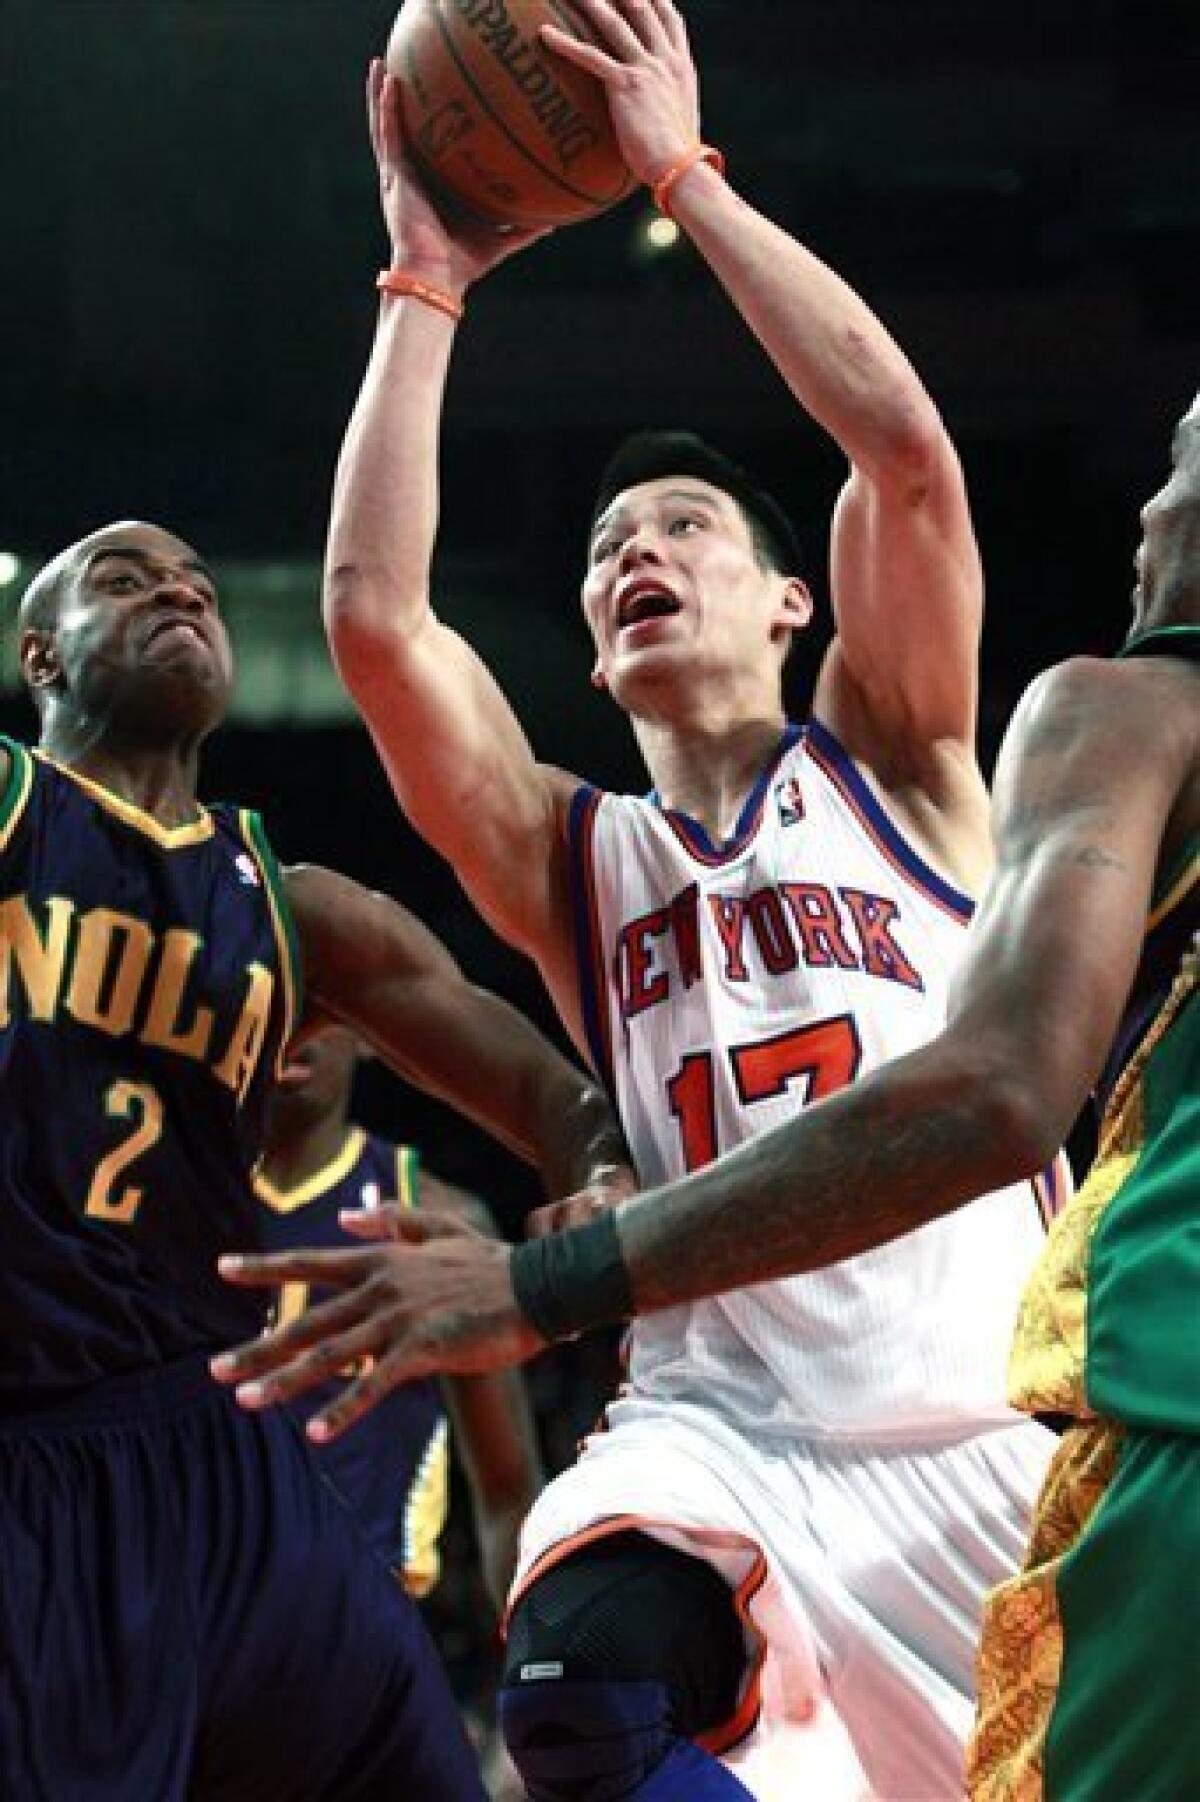 NY Knicks' Jeremy Lin hits game-winning 3-pointer in last second